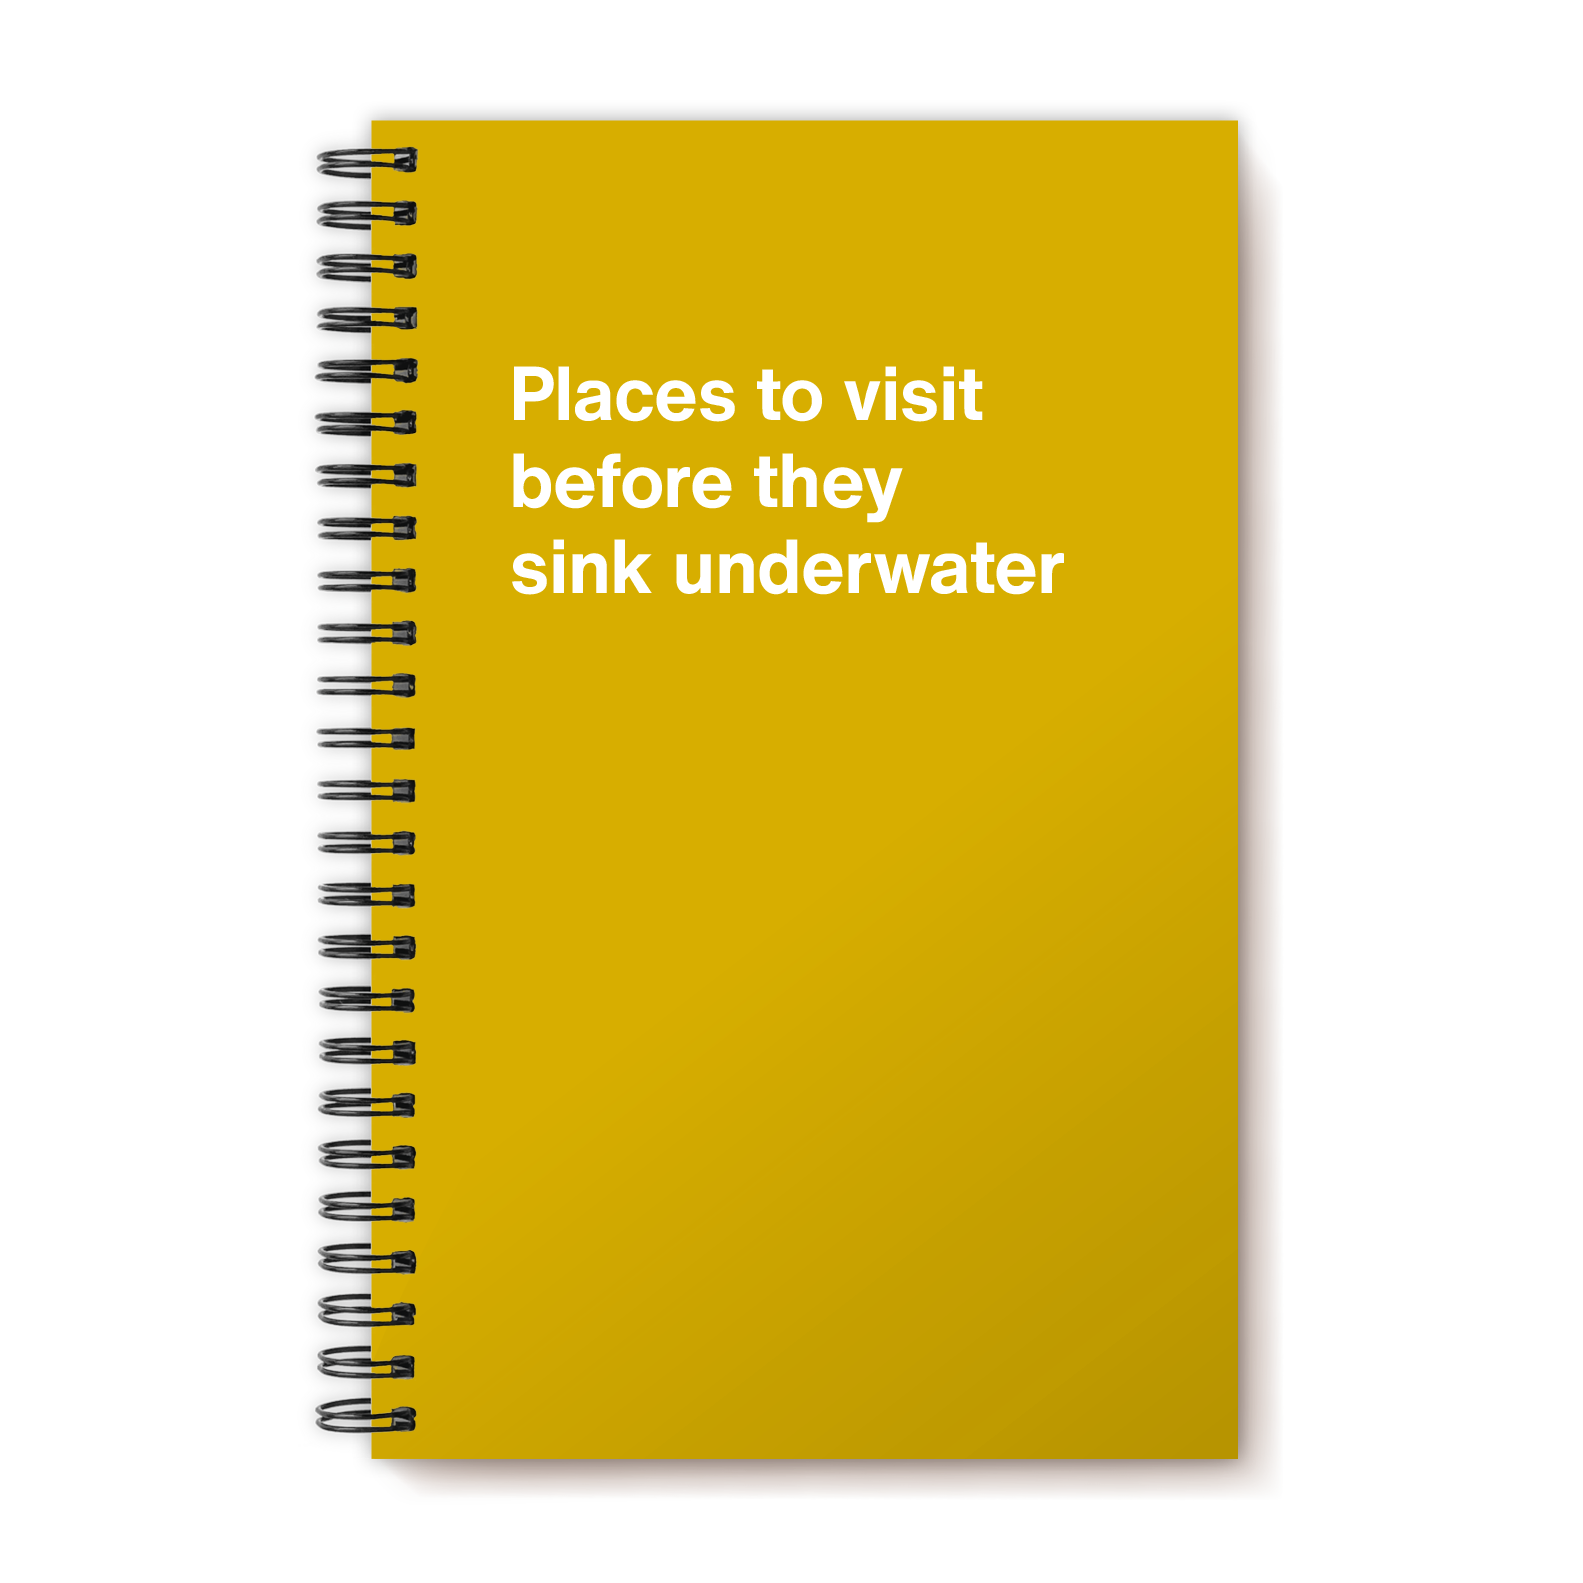 Places to visit before they sink underwater